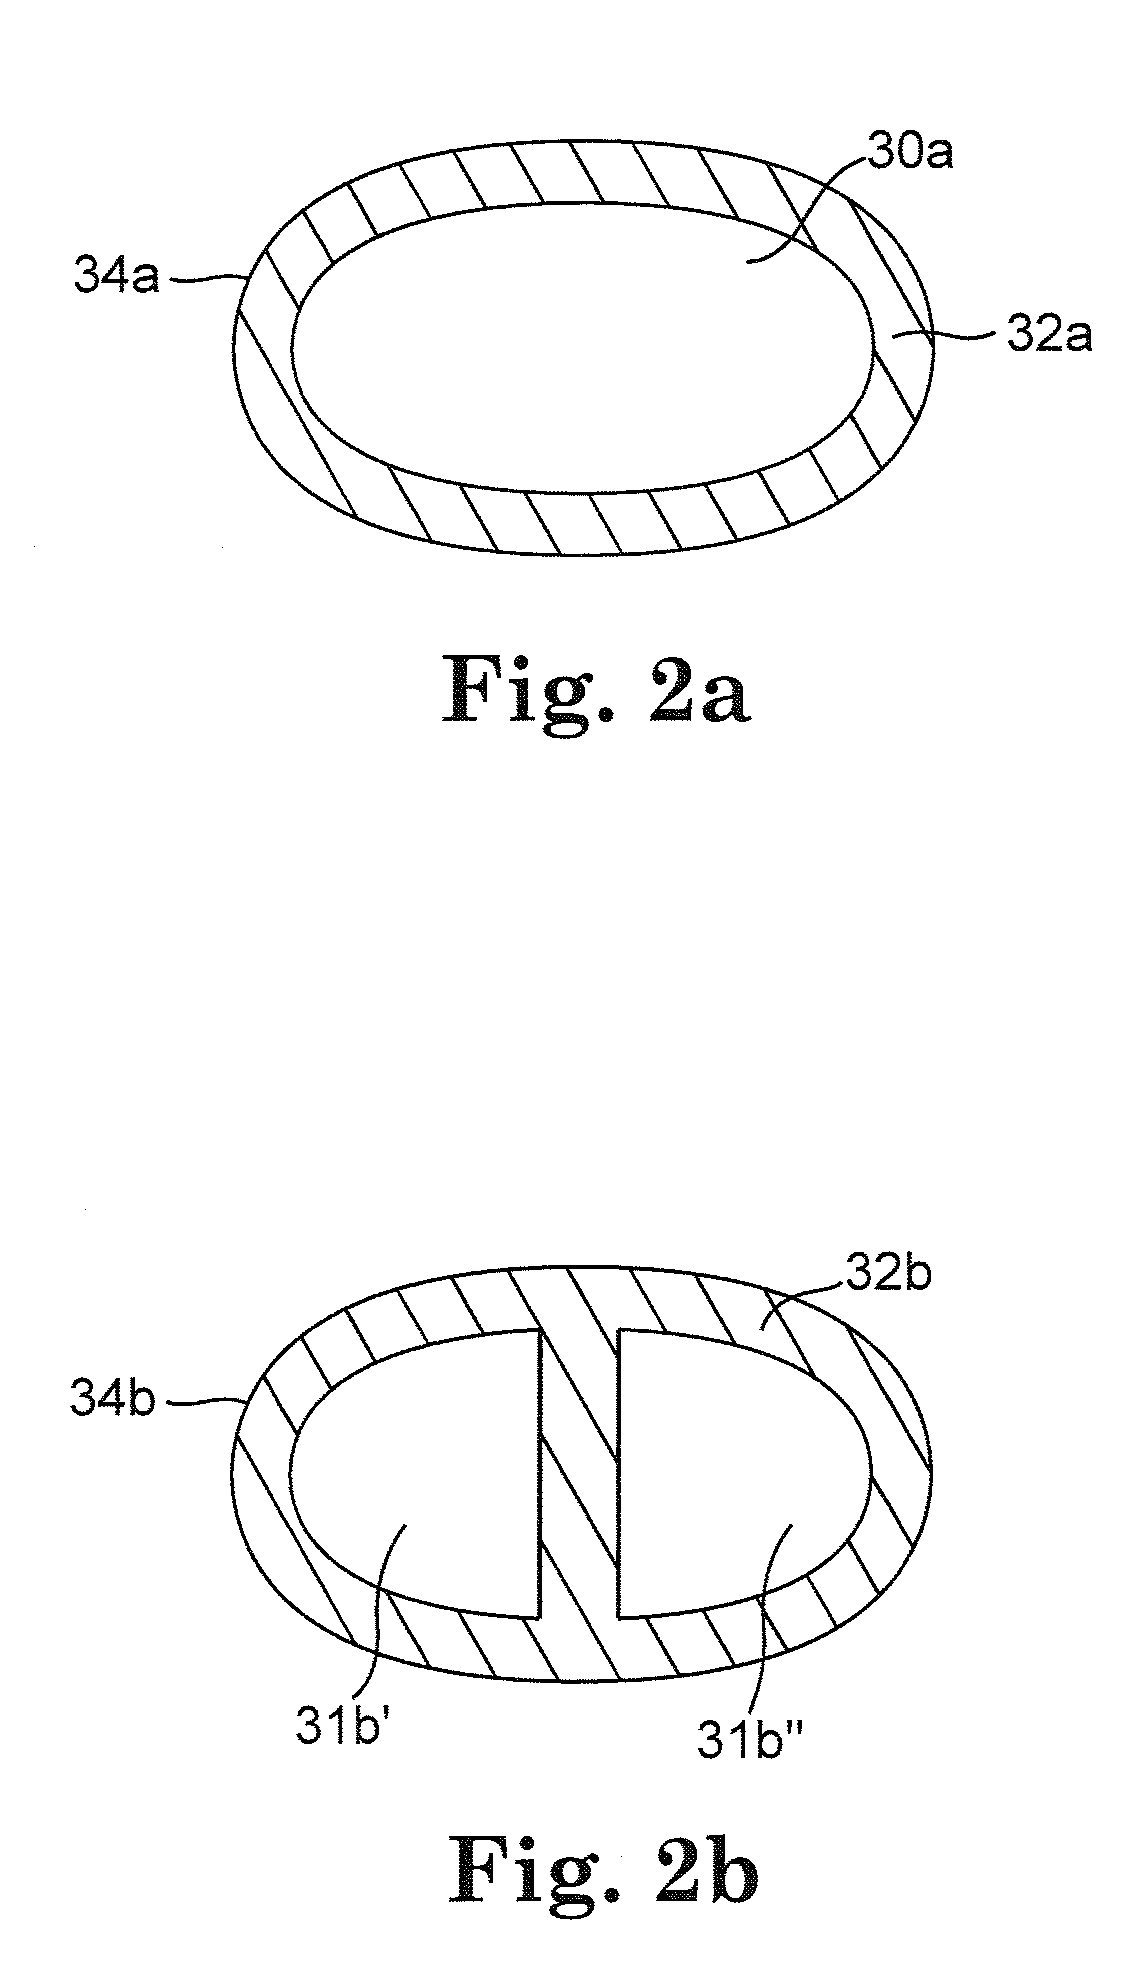 Implantable cerebrospinal fluid flow device and method of controlling flow of cerebrospinal fluid